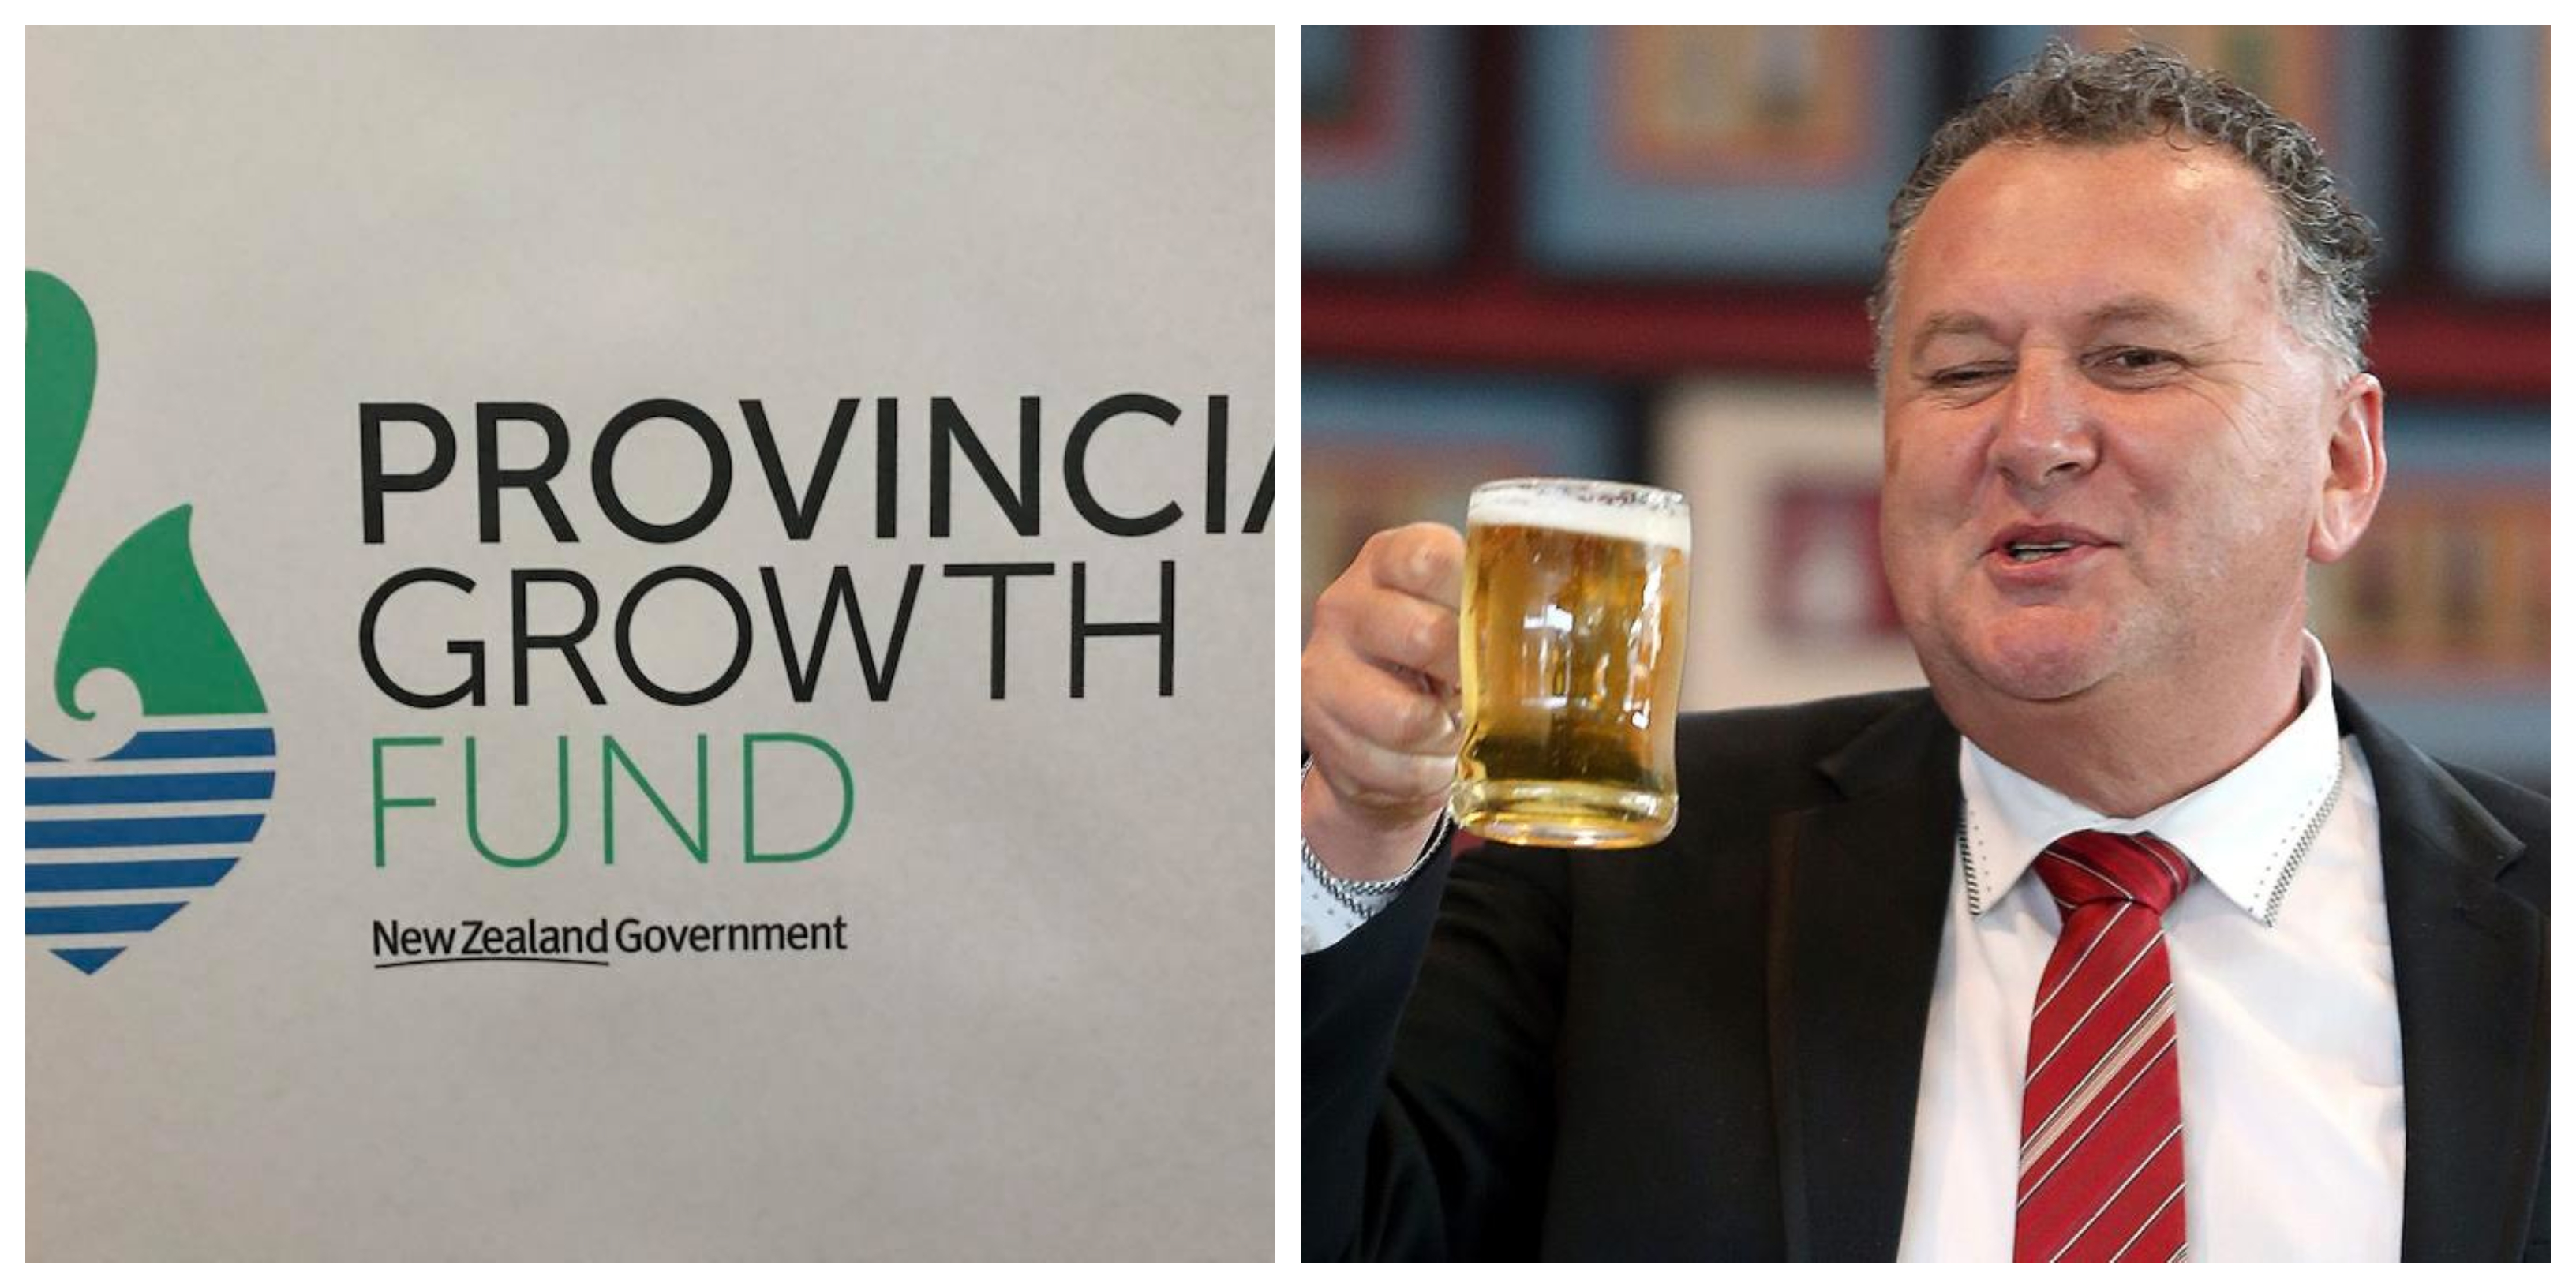 The Provincial Growth Fund logo and Shane Jones